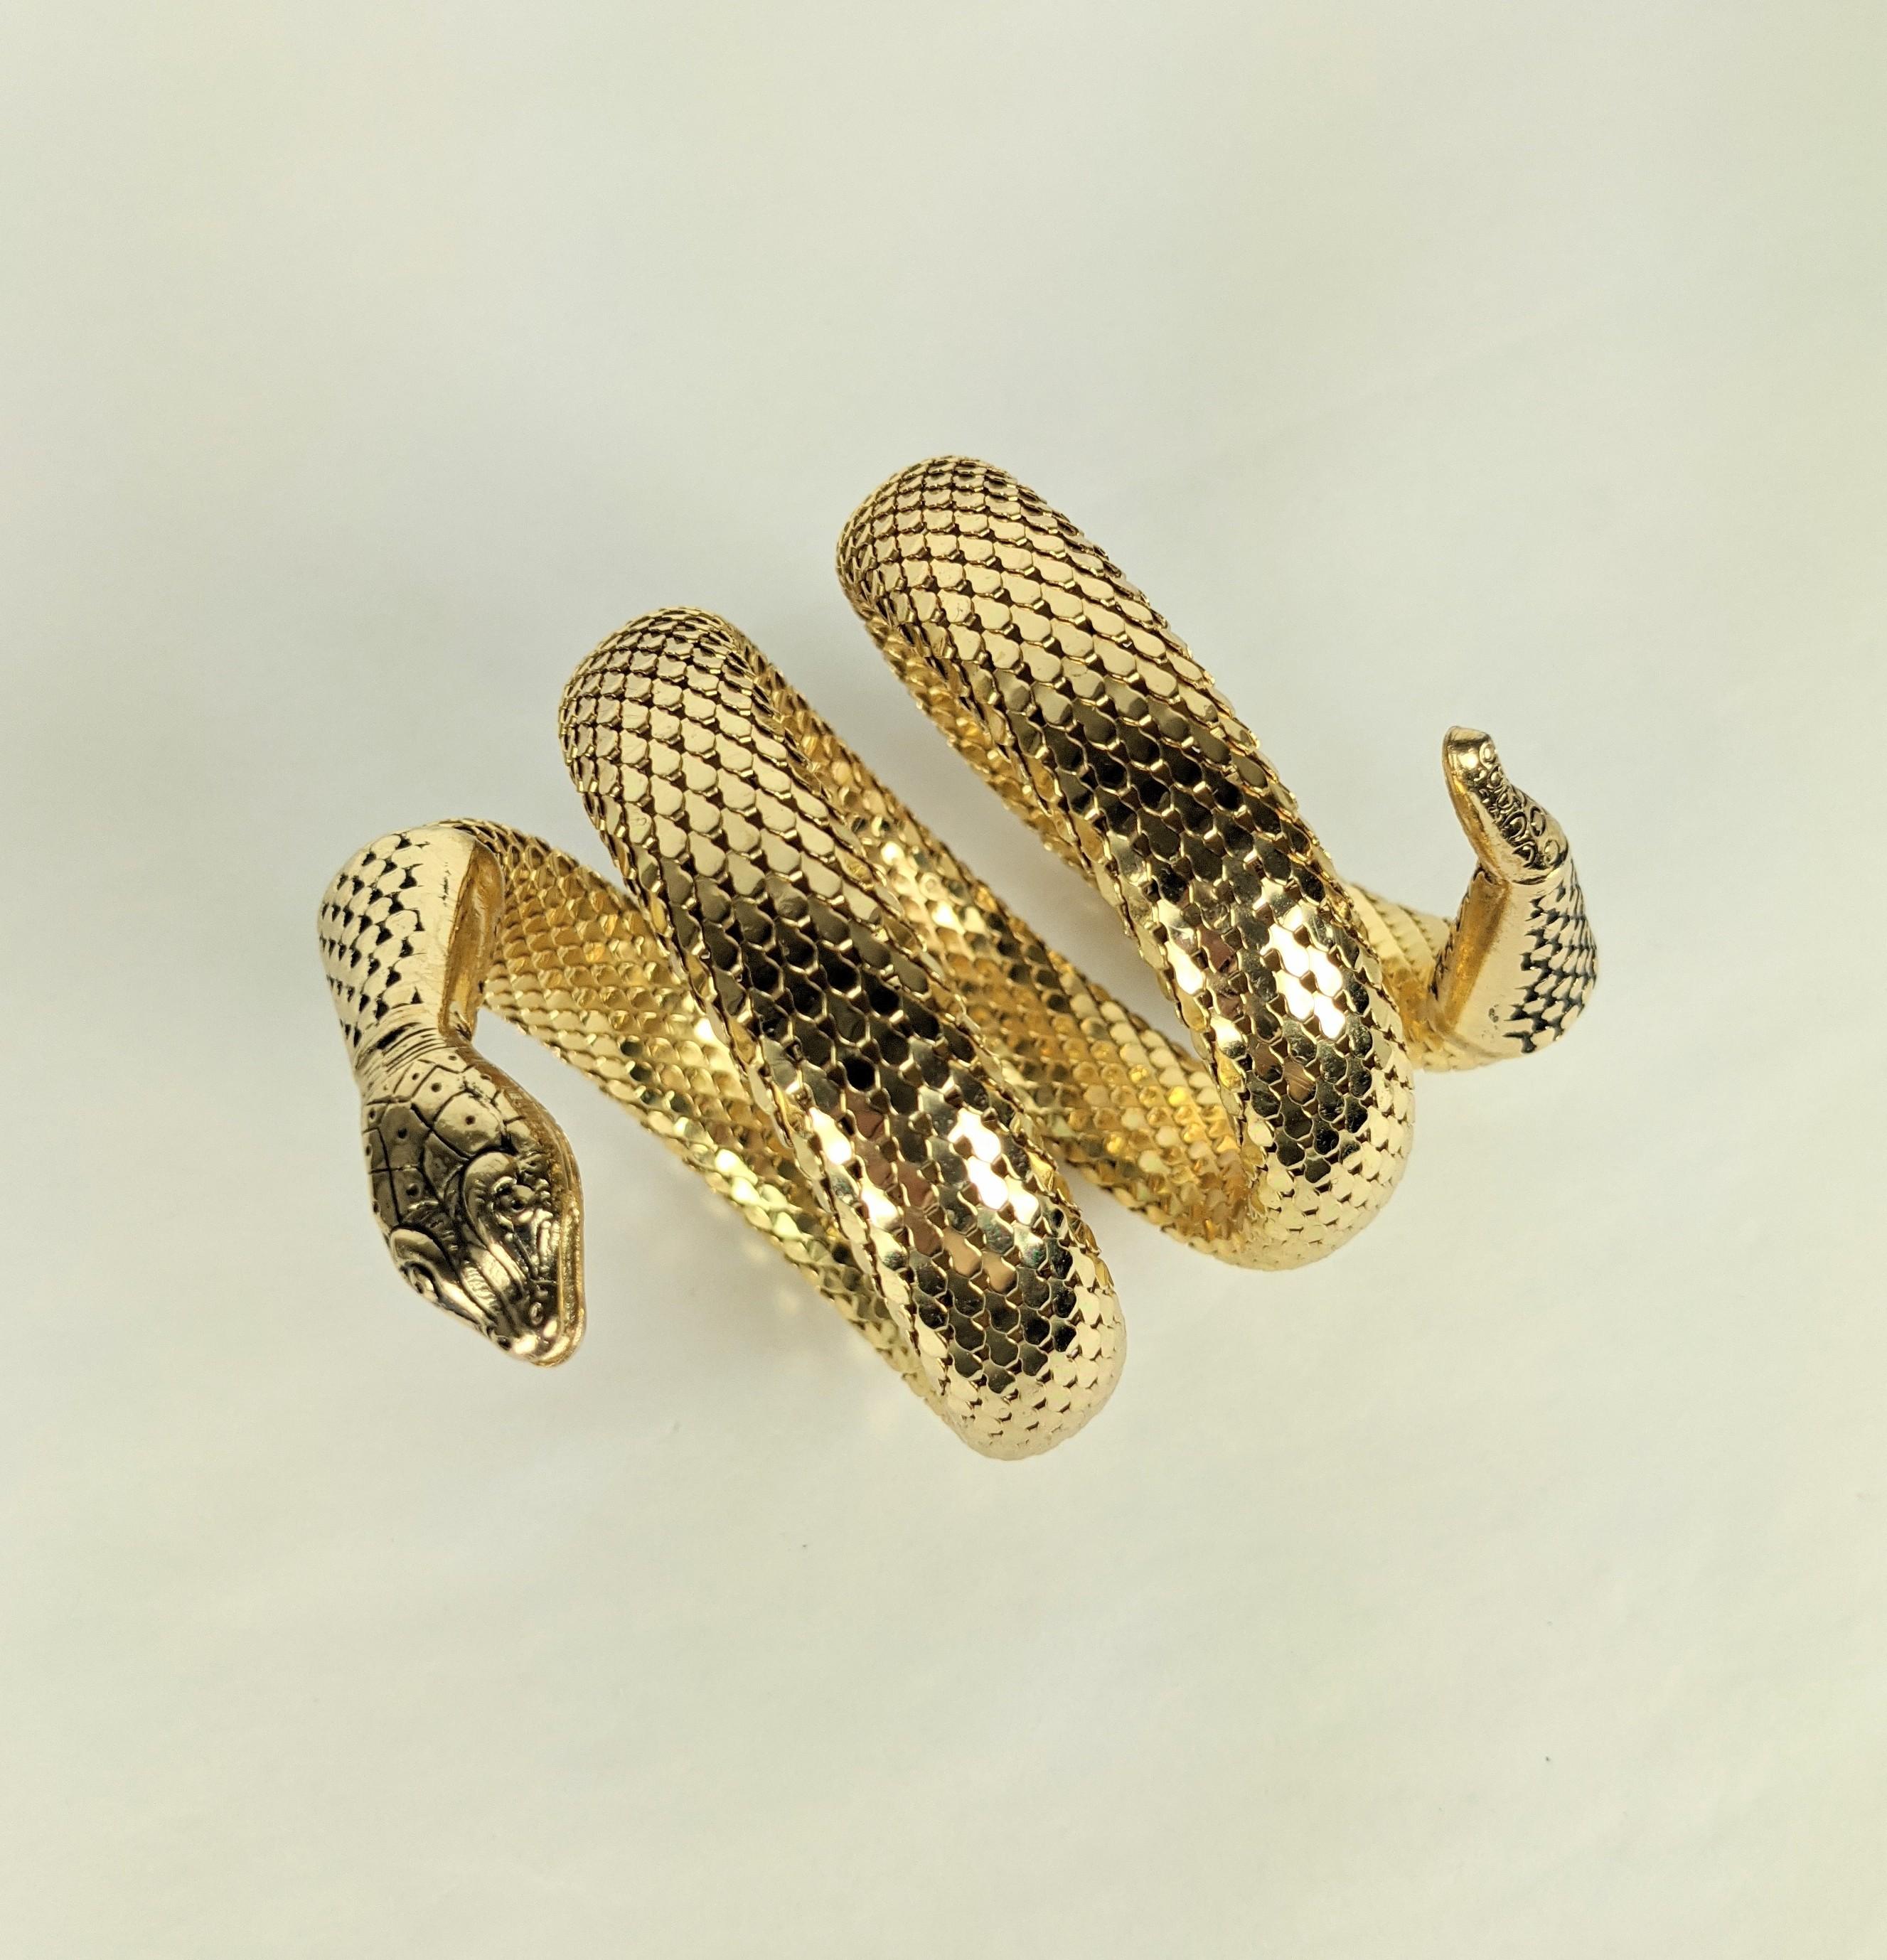 Whiting Davis Coiled Snake Bracelet from the 1980's. Signature mesh is used to form the coiled scales on the snakes body with detailed gilt head and tail. 1980s USA.
Approx 3